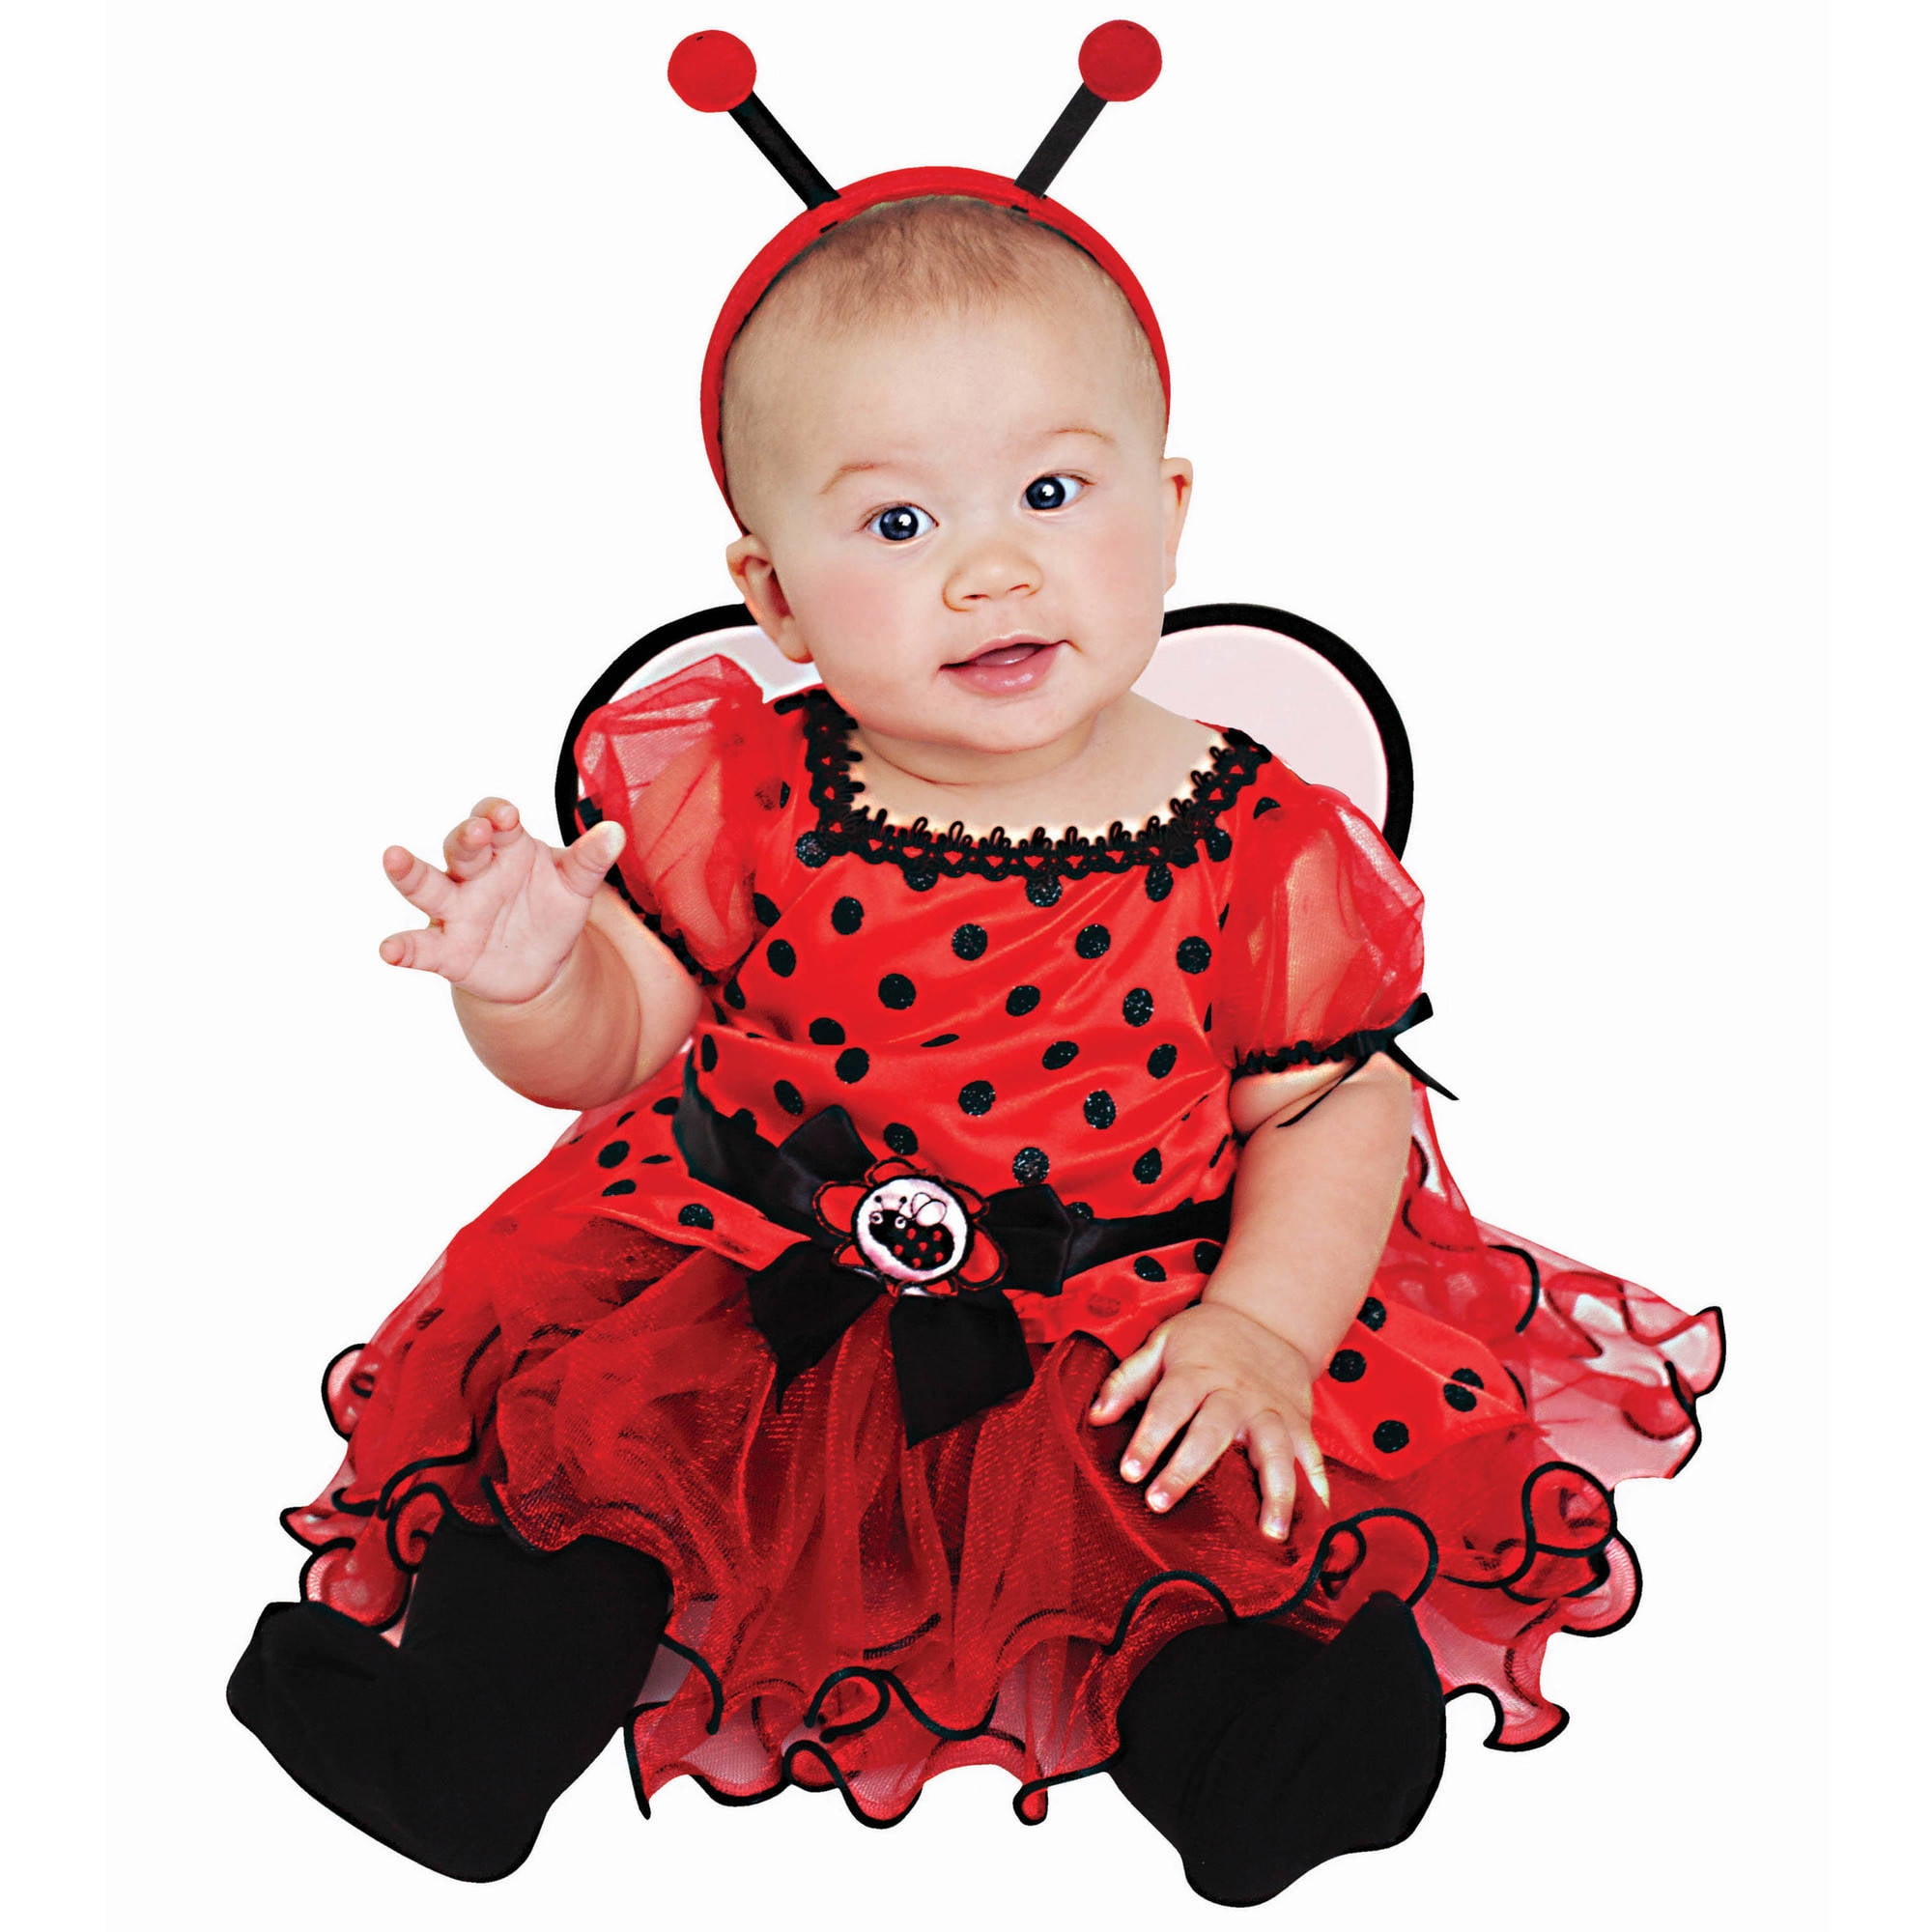 Turn your baby into a sweet little Ladybug for Halloween in this Infant Lad...